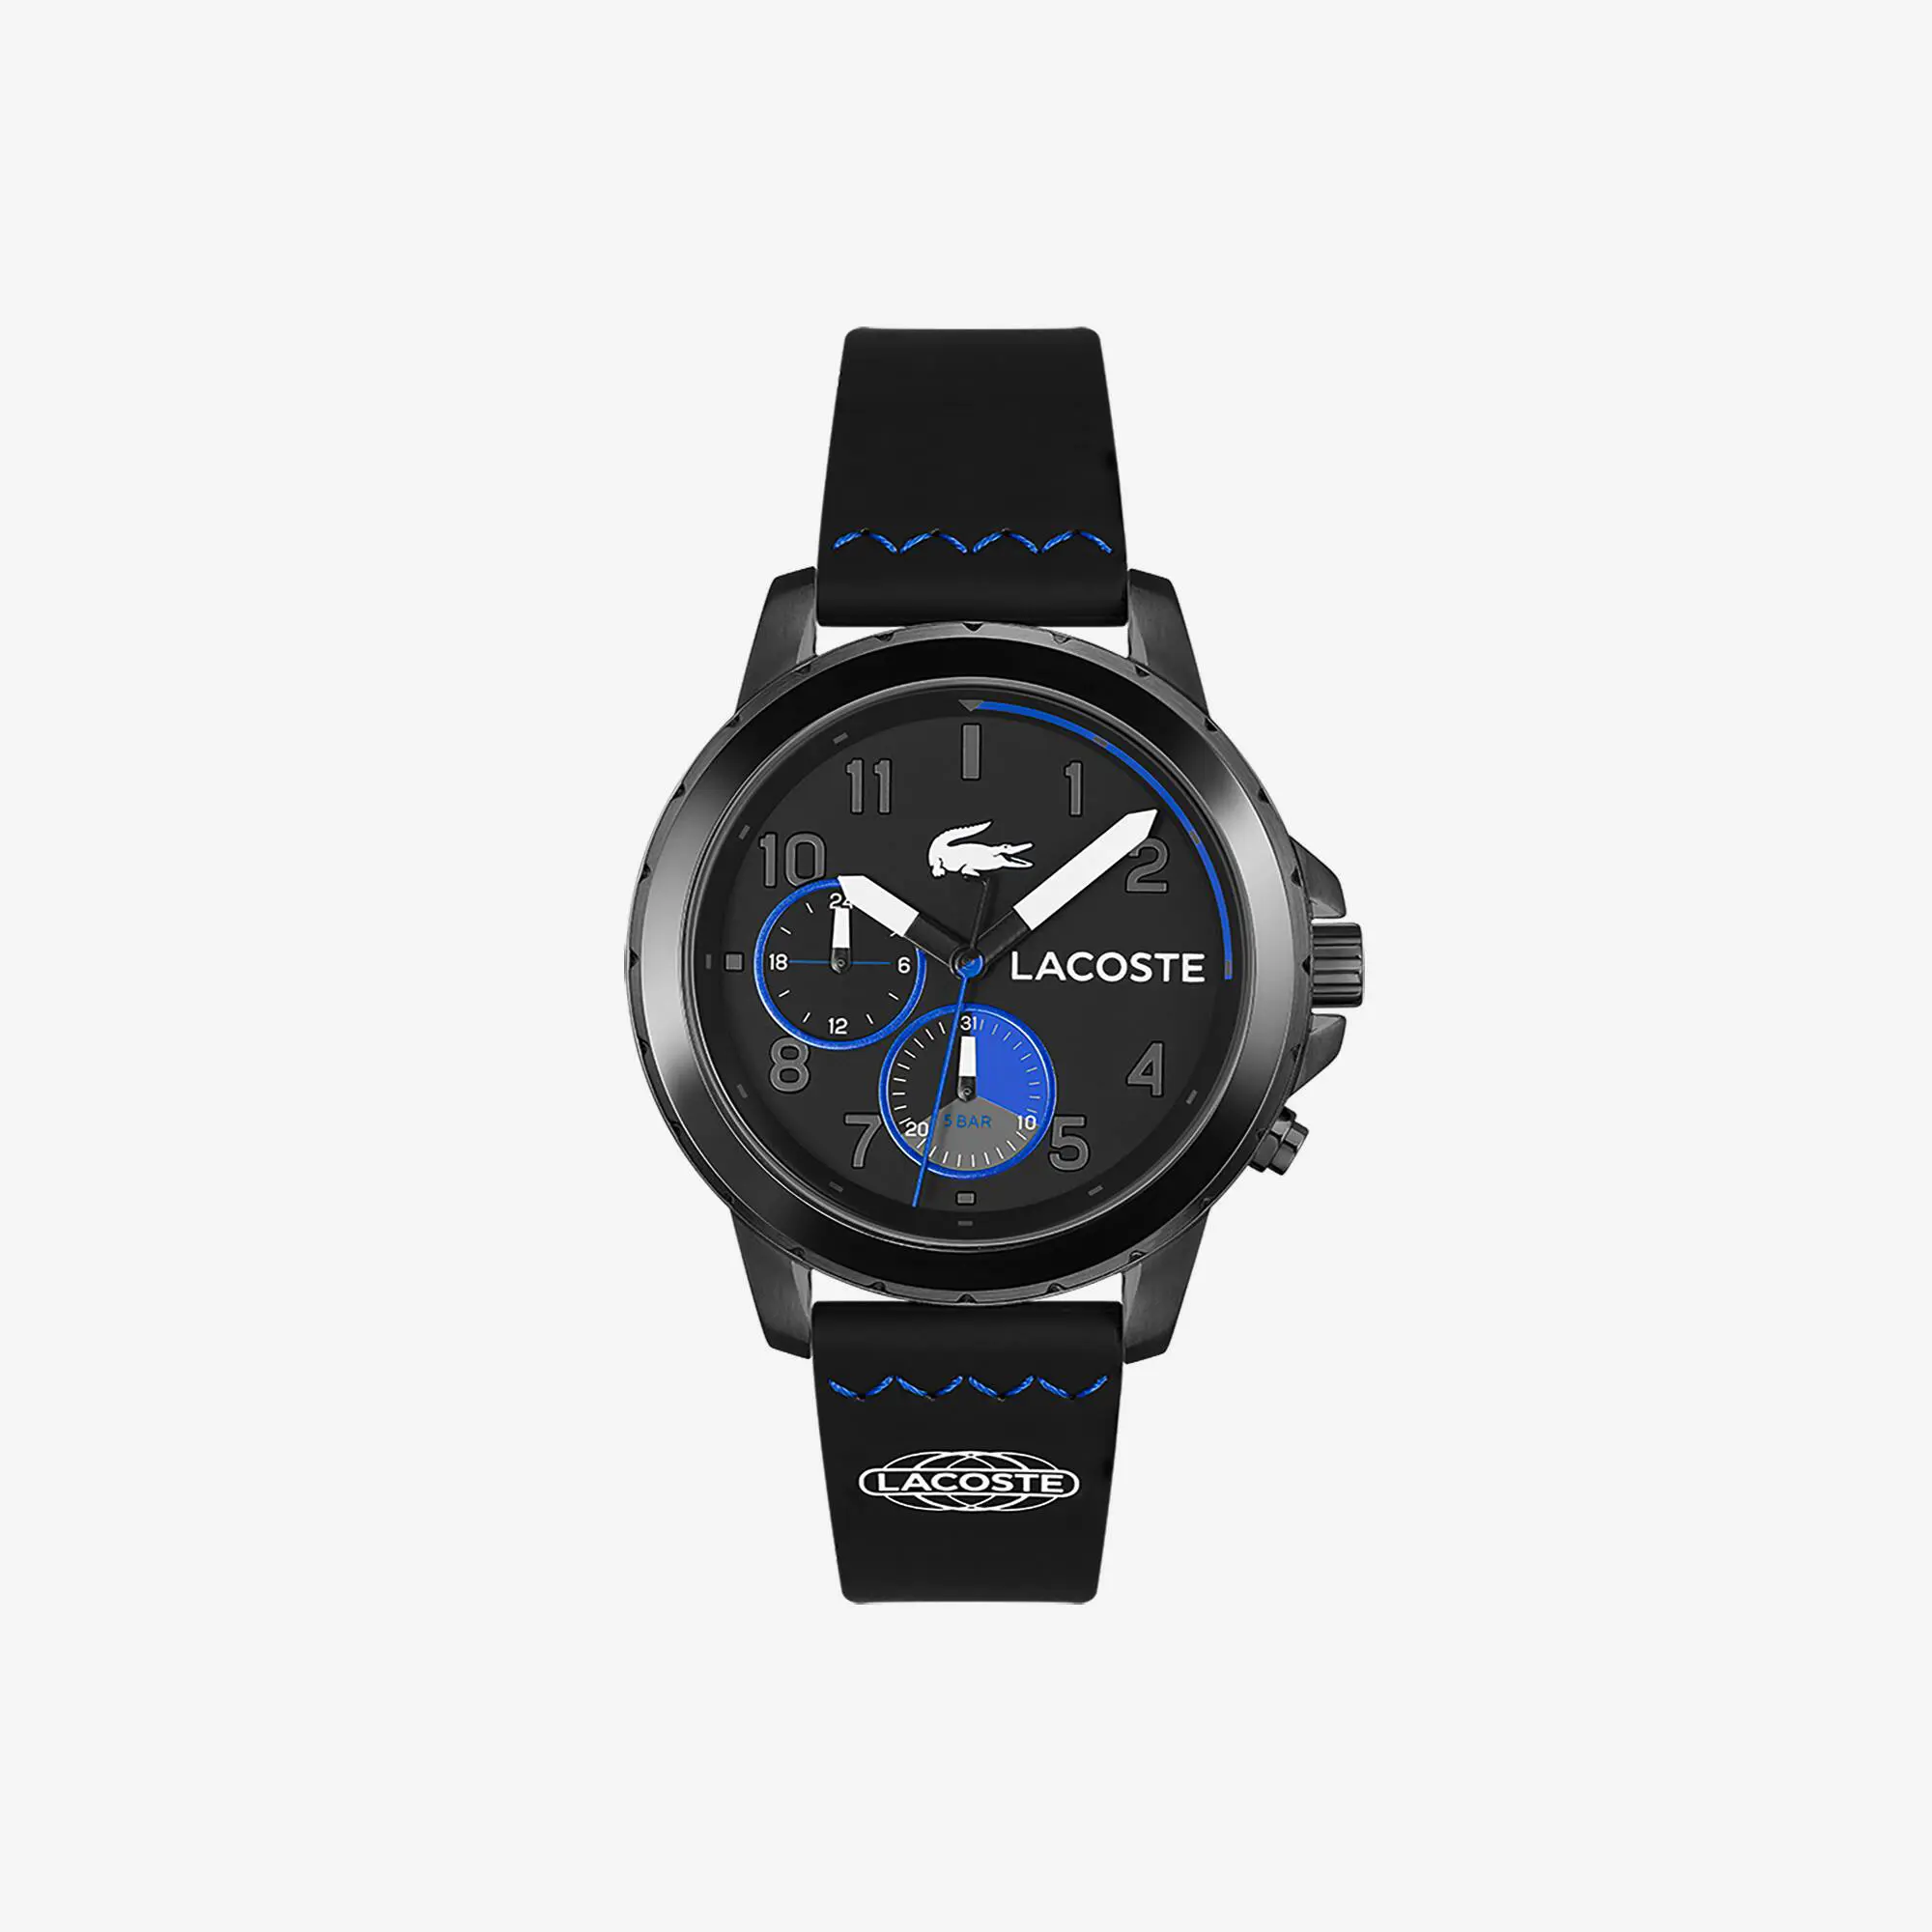 Lacoste Men’s Endurance Multifunctional Black Silicone Watch. 2